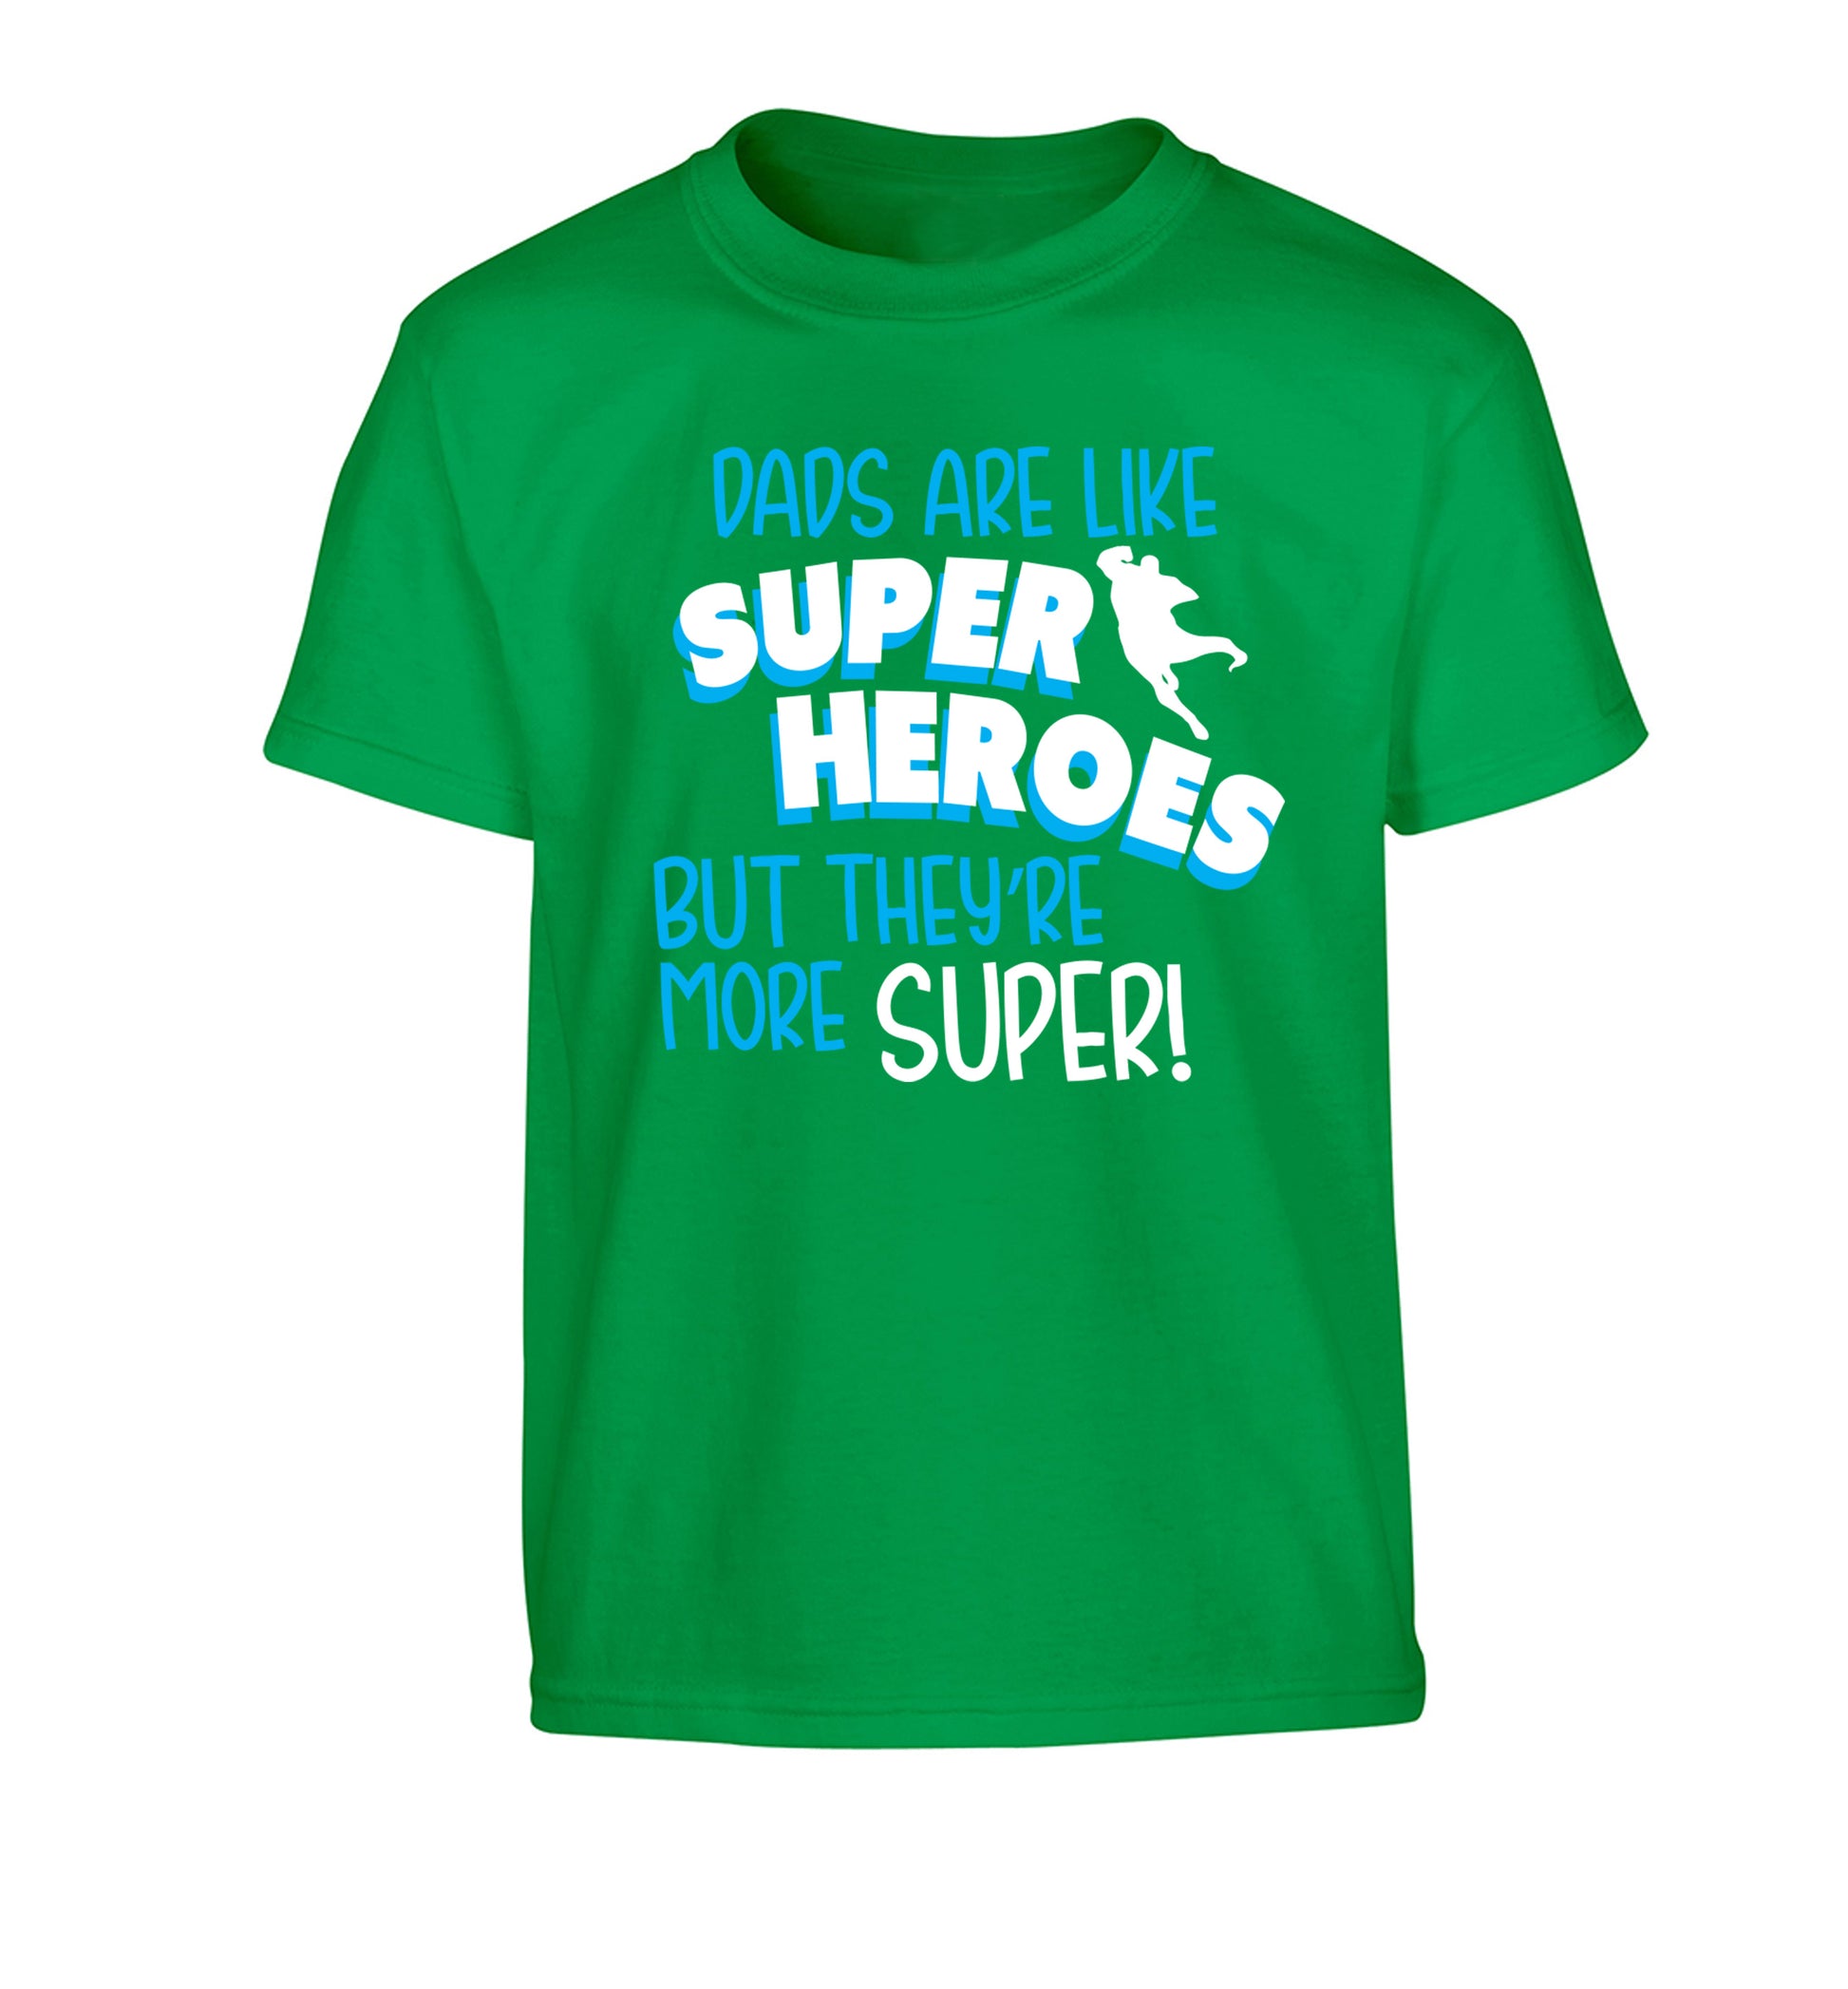 Dads are like superheros but they're more super Children's green Tshirt 12-13 Years